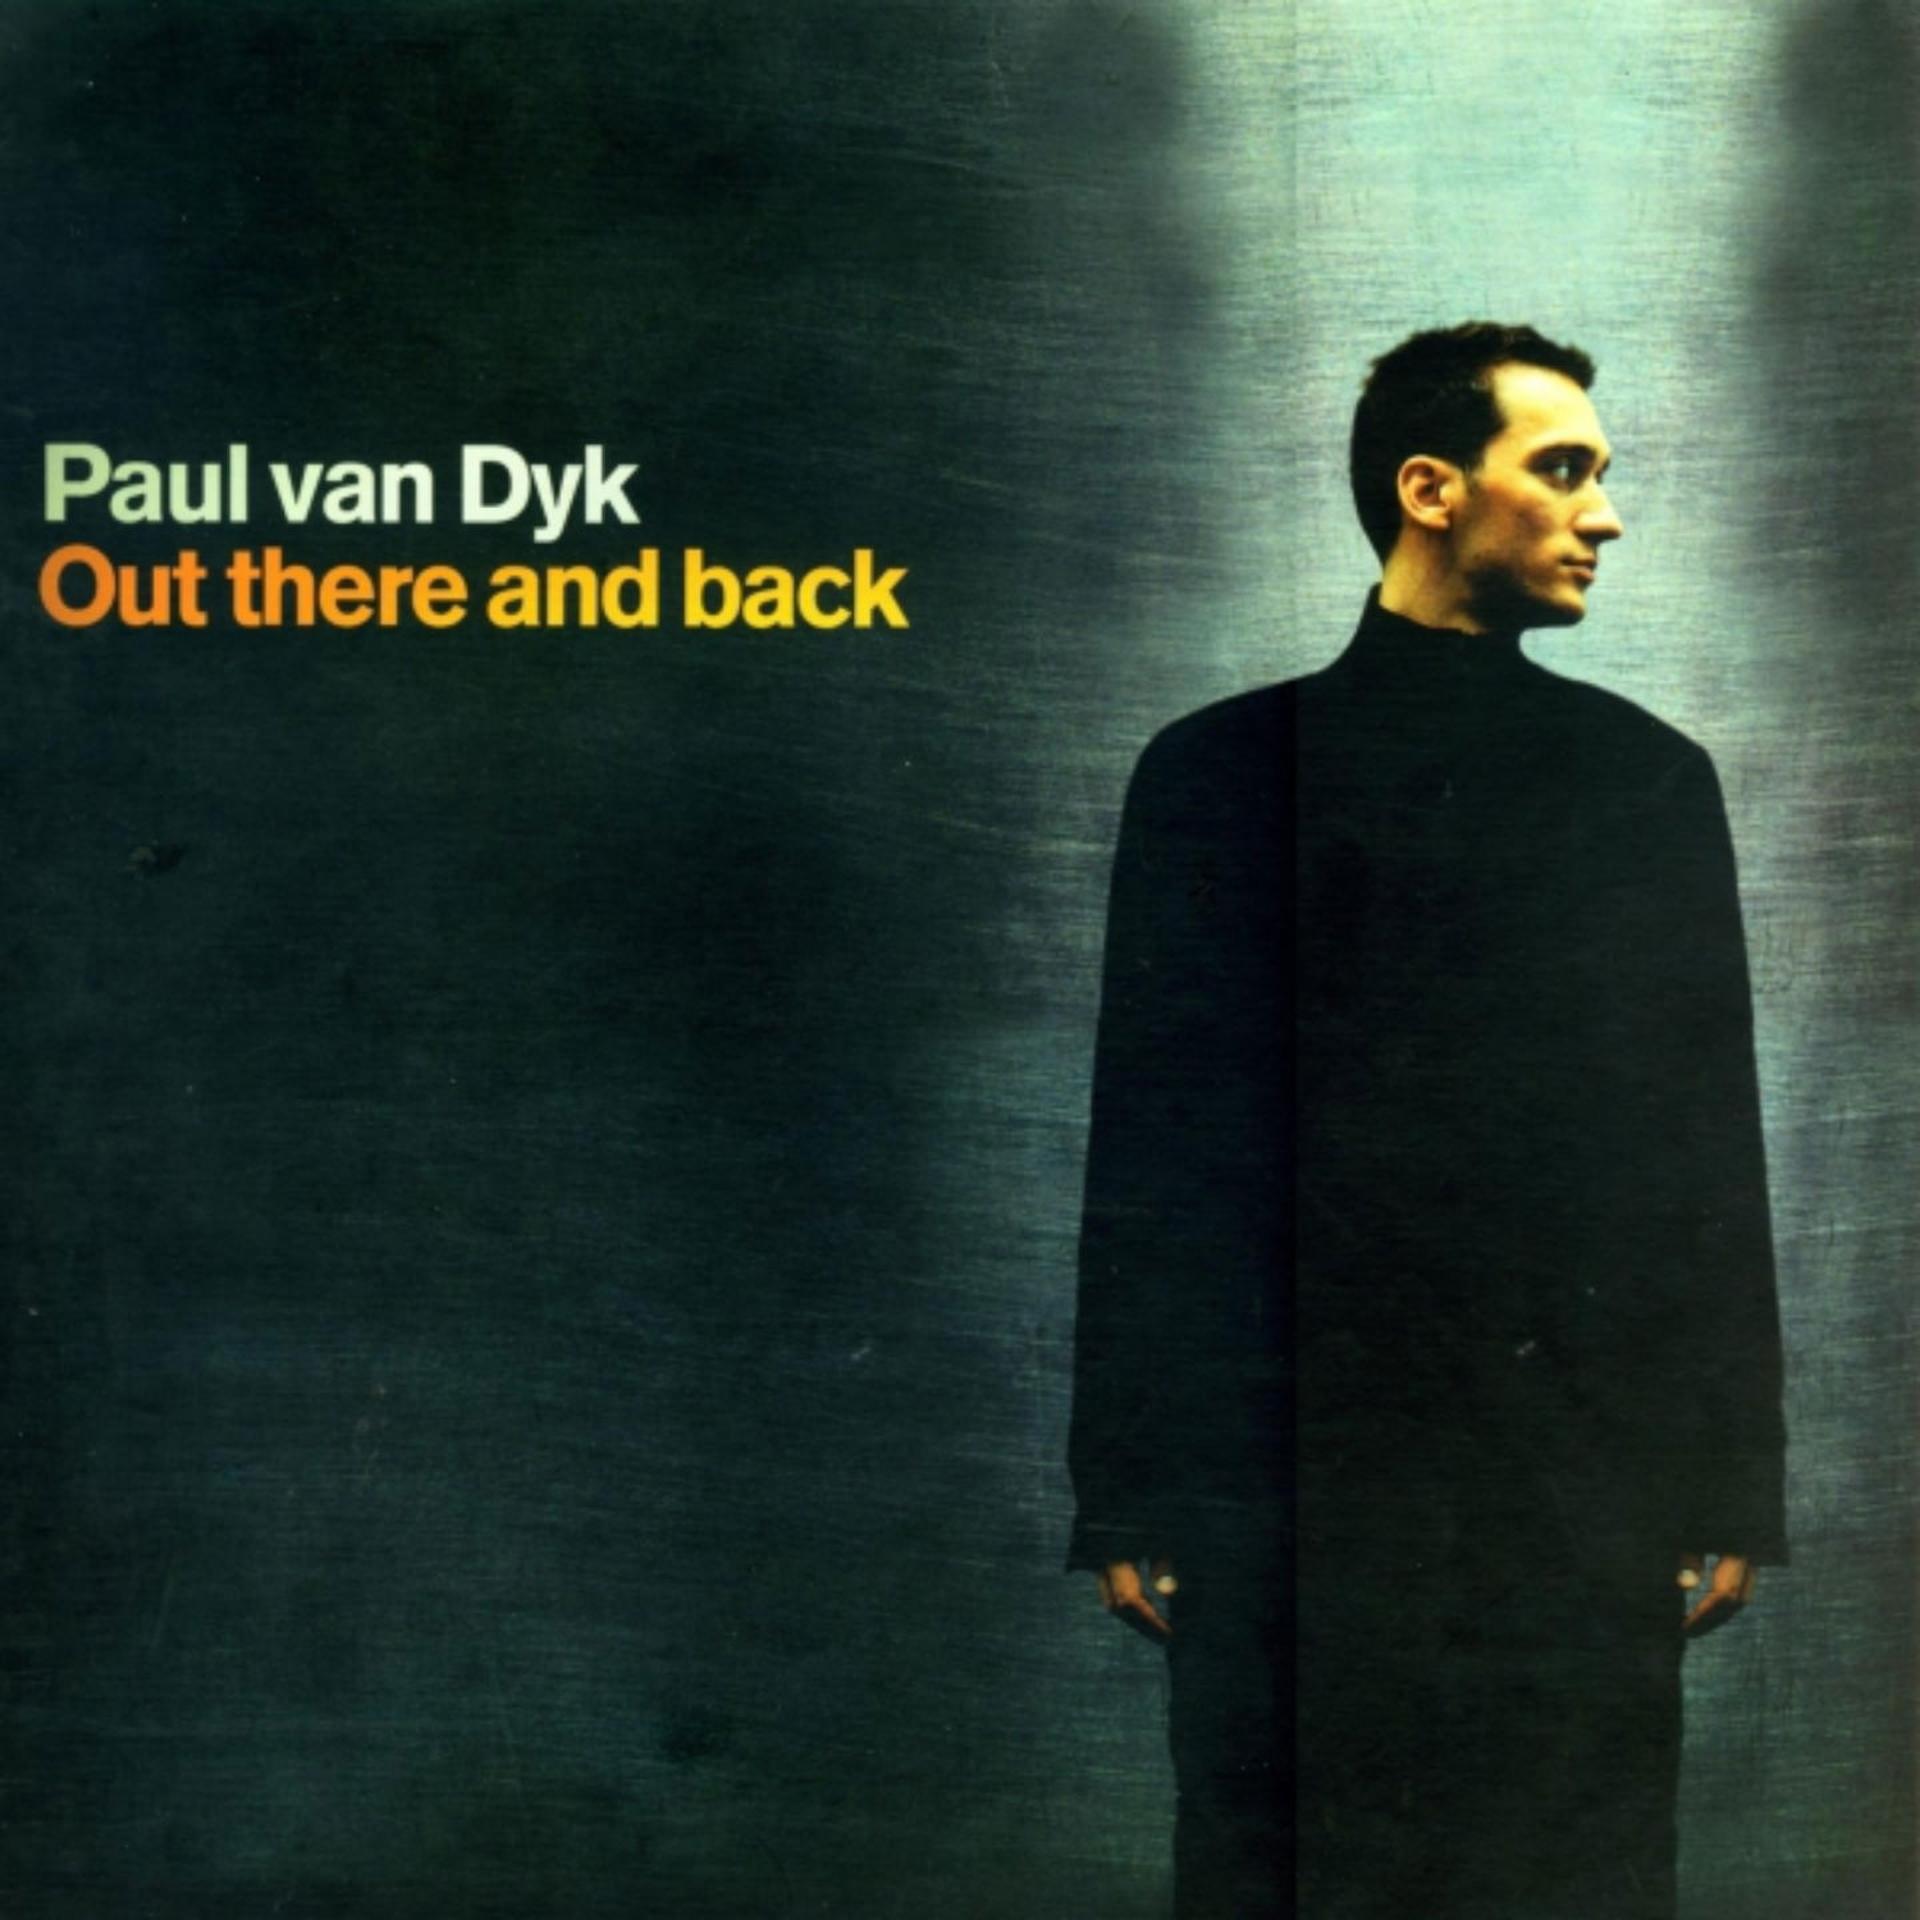 Paul van Dyk out there and back. Paul van Dyk out there and back 2000. Paul van Dyk 2000. Пол Ван Дайк альбомы. Paul back